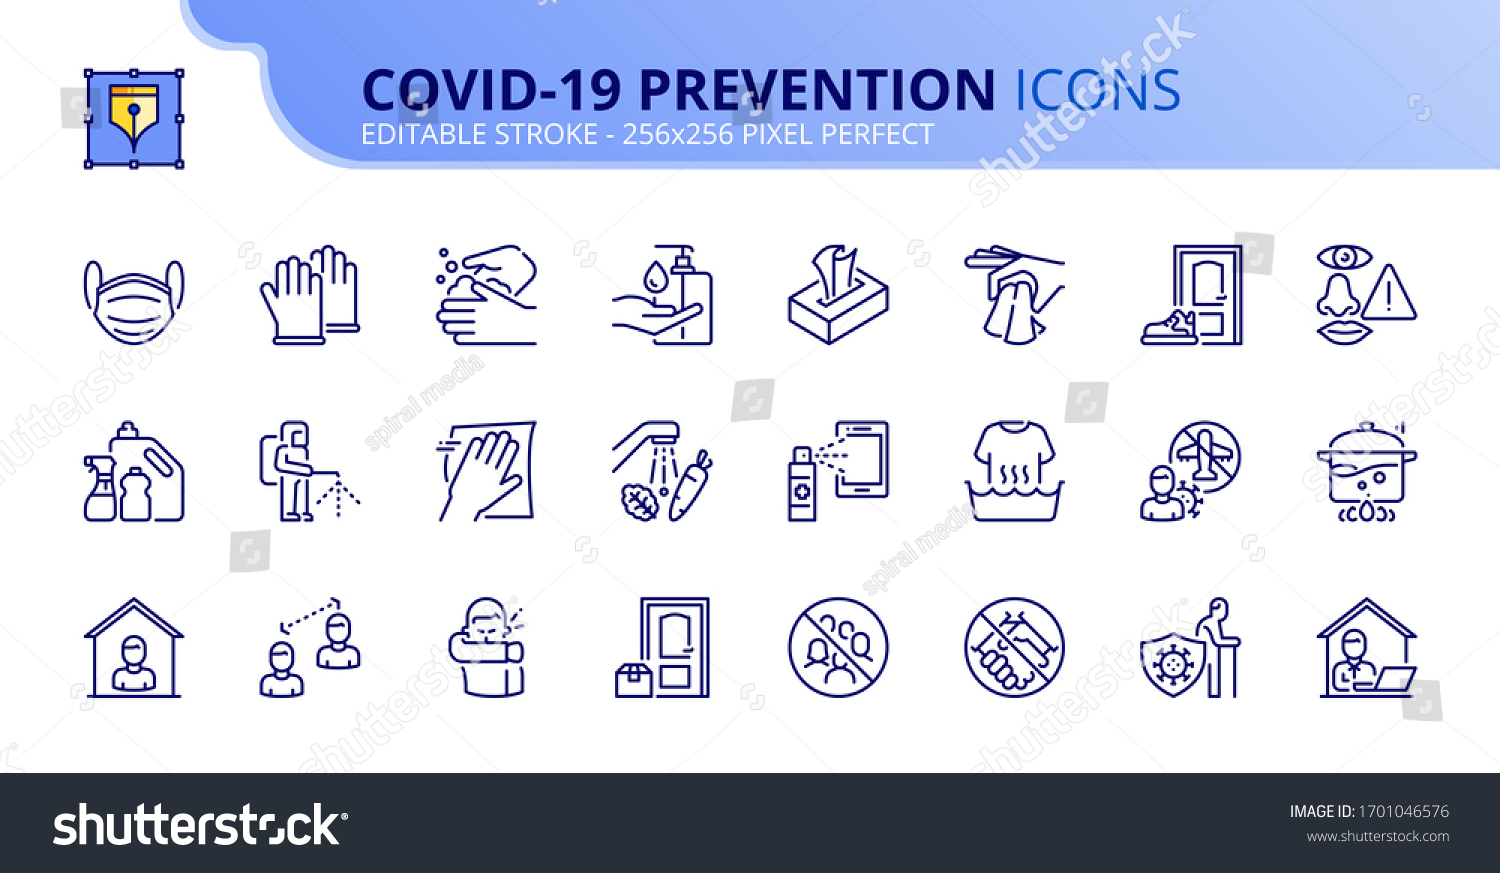 Outline icons about Coronavirus prevention.  Clean and disinfect, sanitizer products, wash your hands, wear mask and social distancing. Editable stroke. Vector - 256x256 pixel perfect. #1701046576